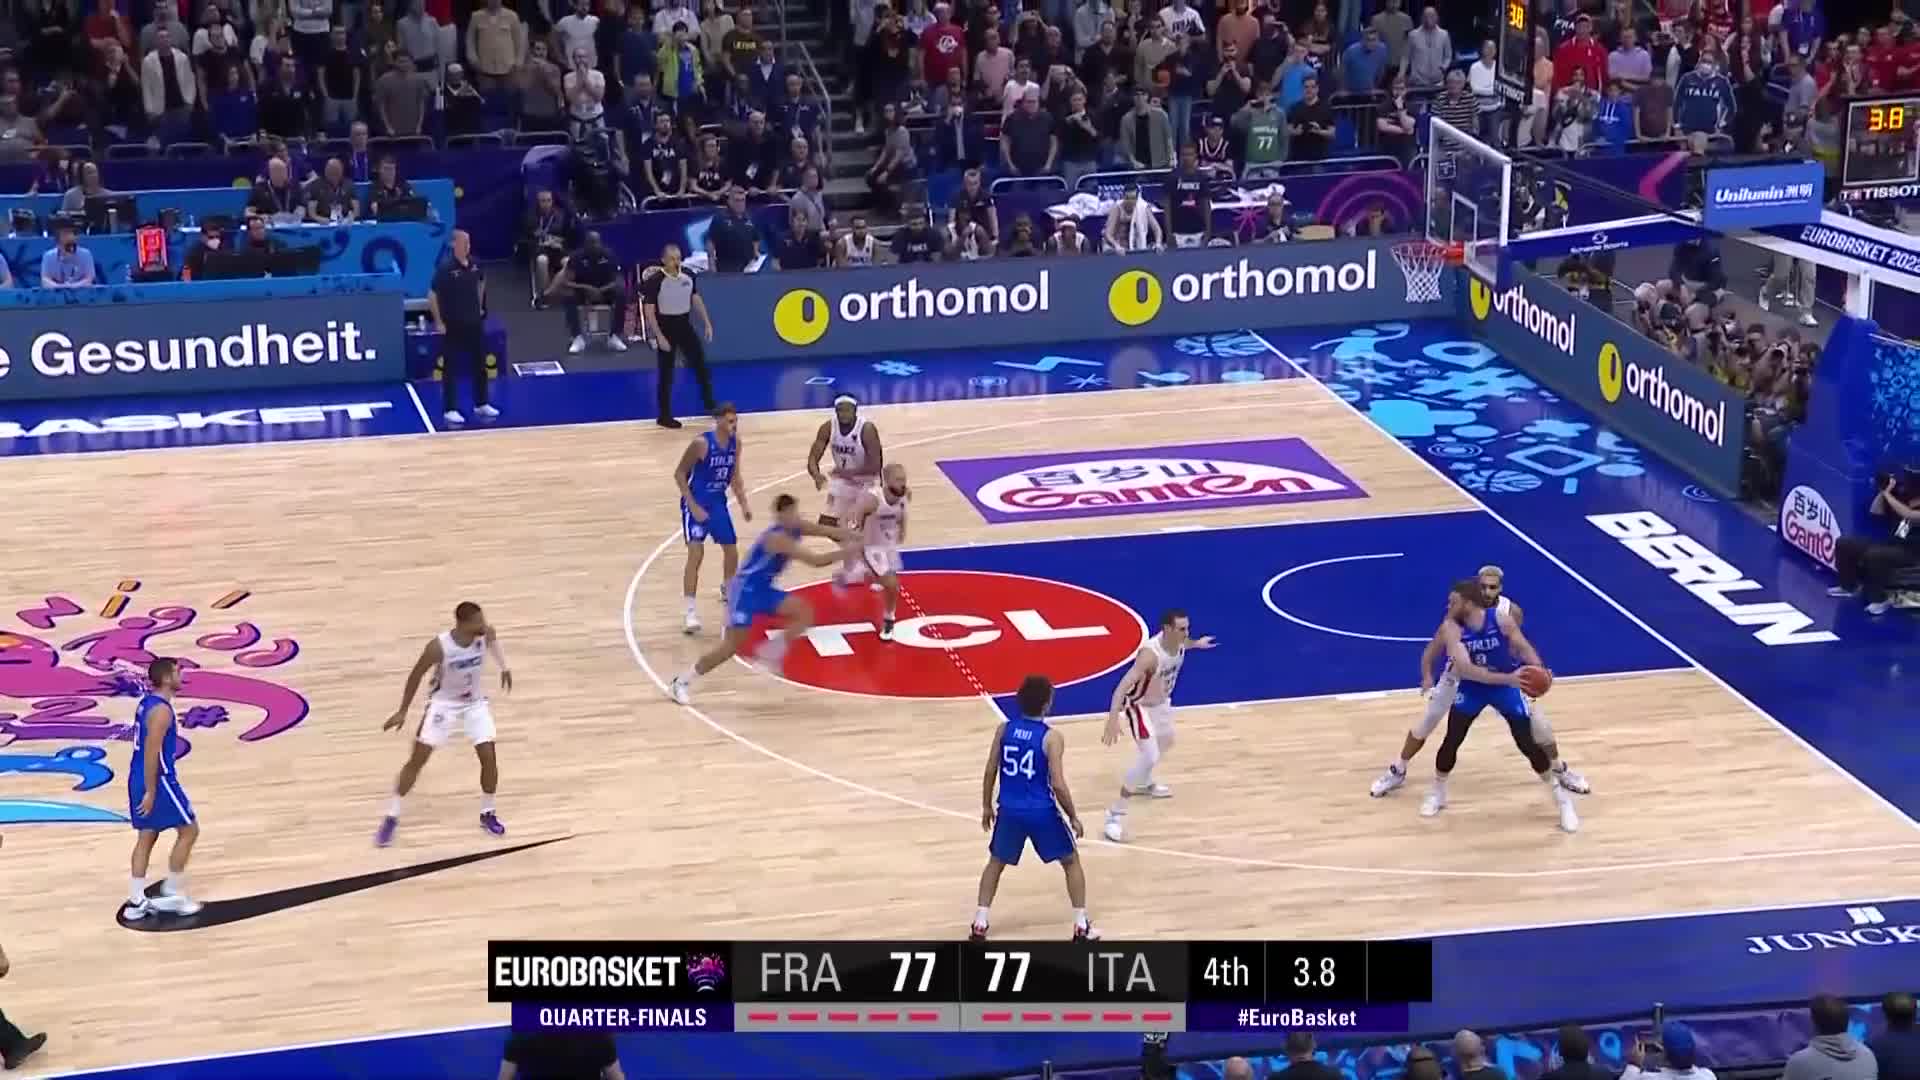 NBA Offseason Goberts Clutch Time Dominance Leads France to EuroBasket Semifinals